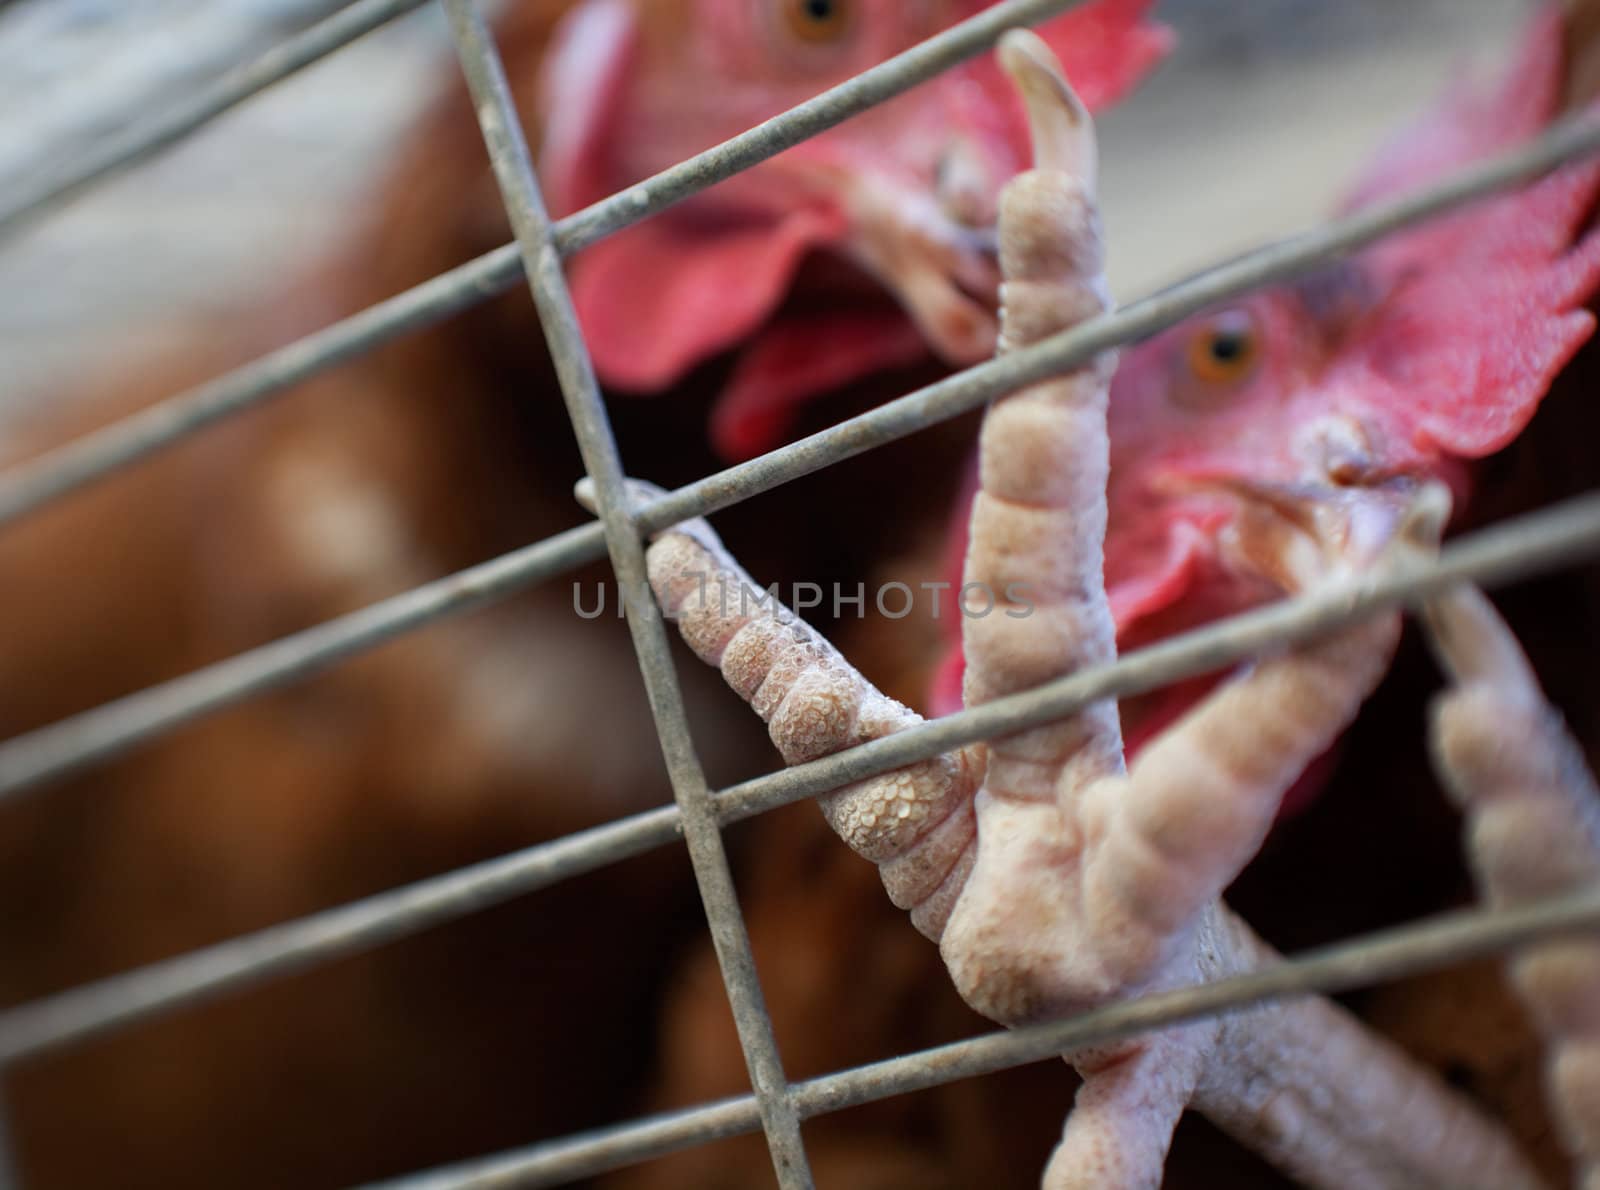 Close up image of  chickens in a cage